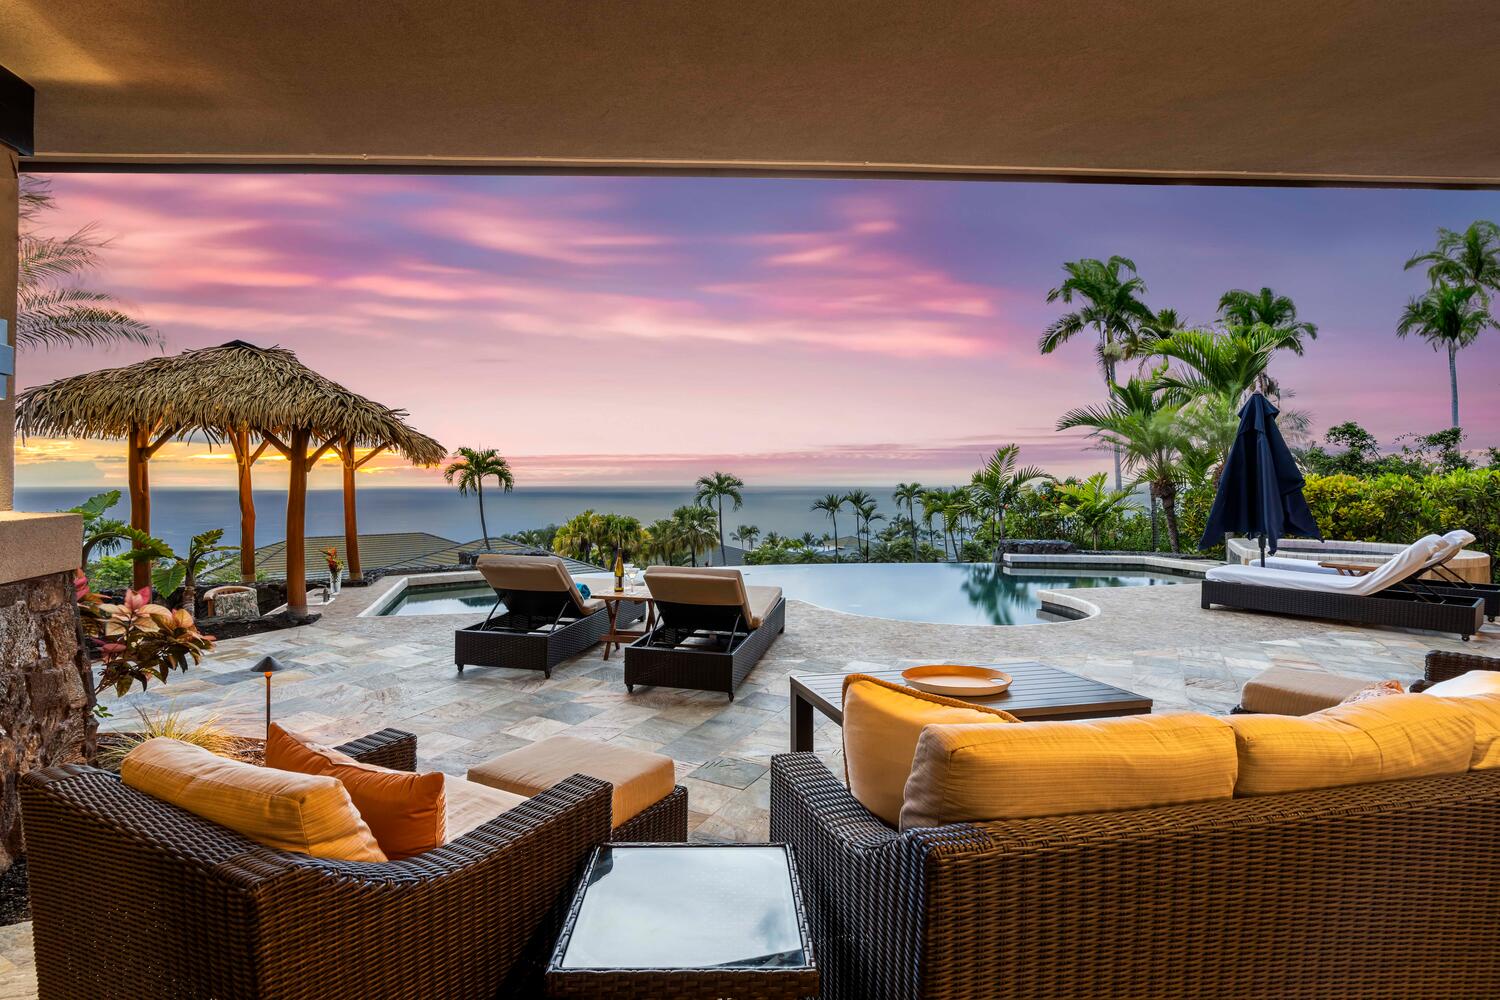 Kailua Kona Vacation Rentals, Island Oasis - Nestled under the evening sky, our poolside chaise lounges invite you to relax and savor the twilight hues.